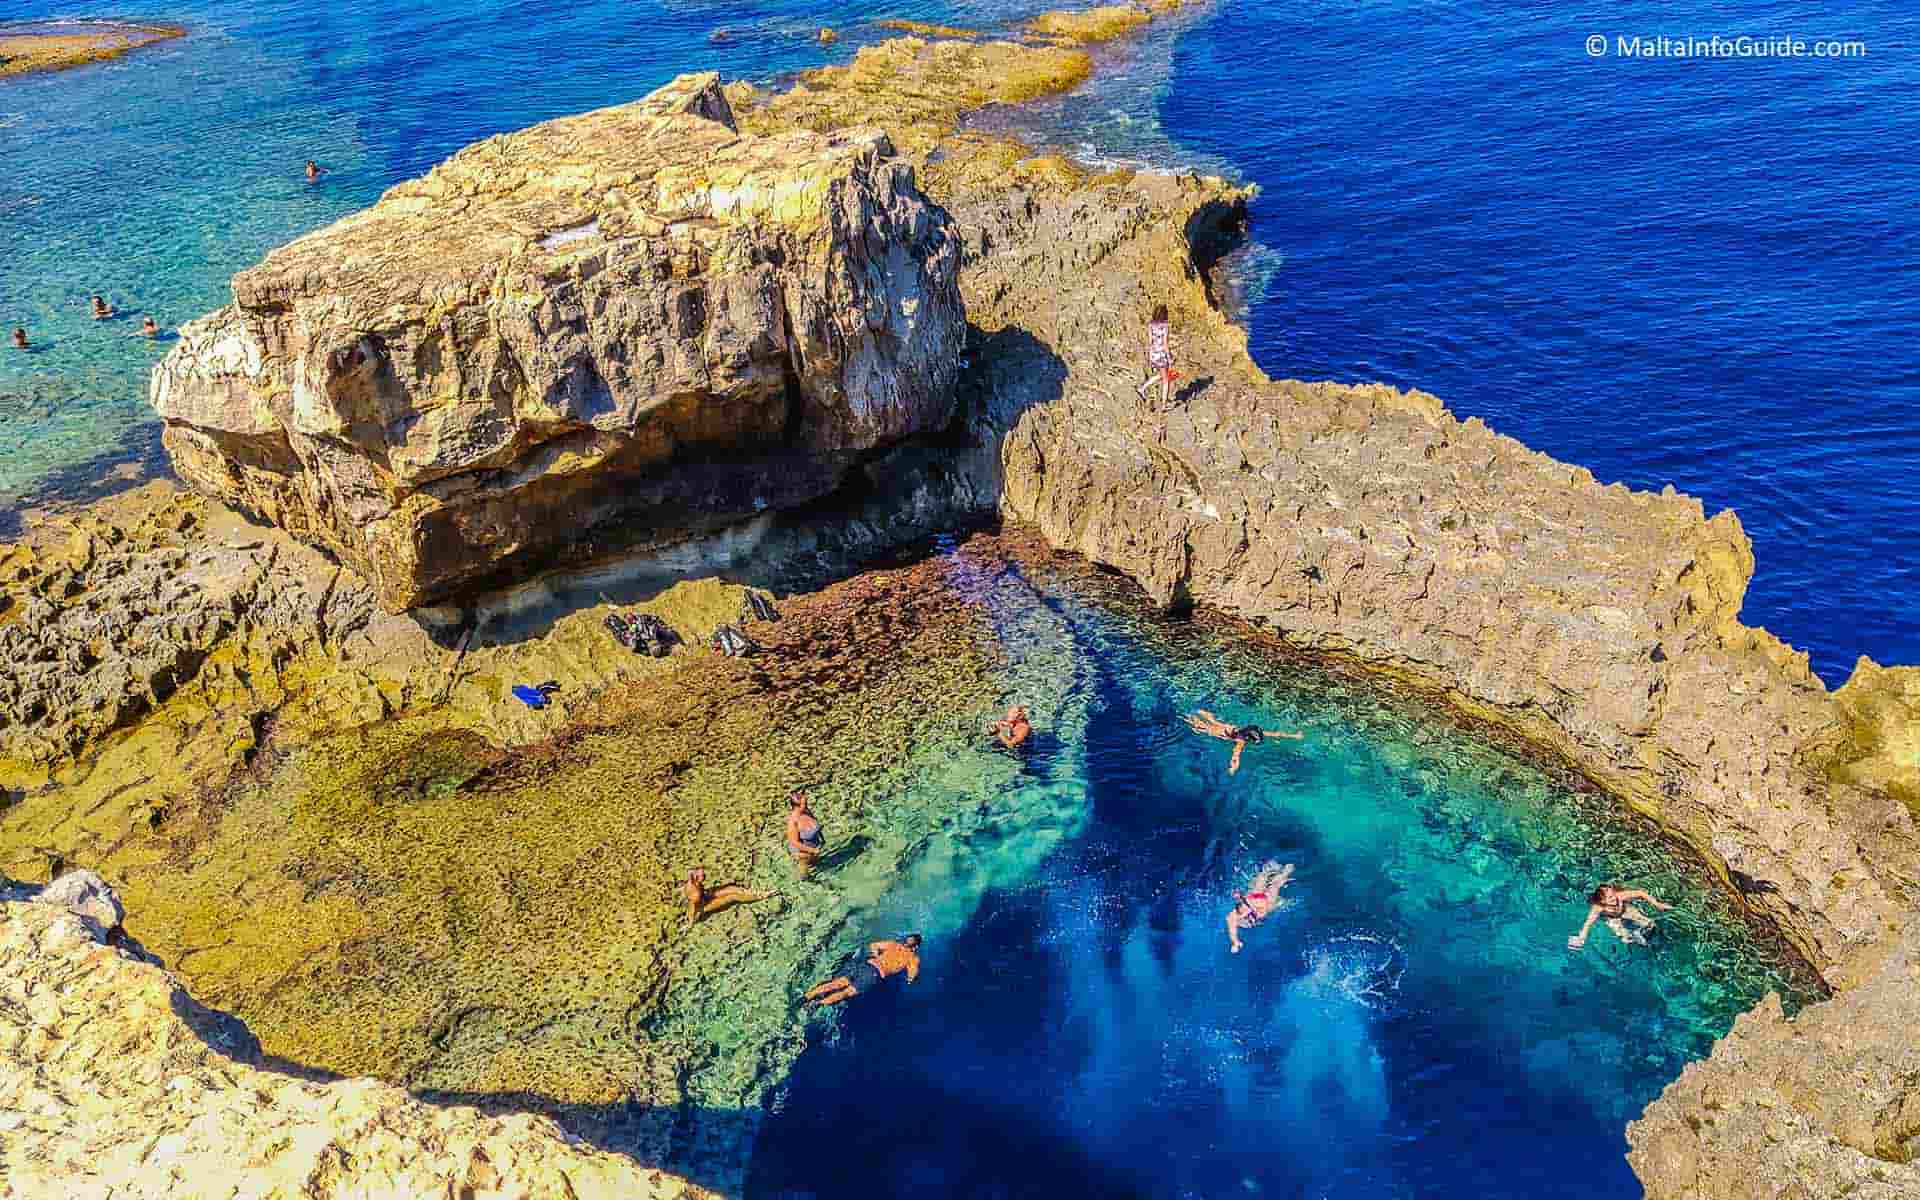 The Blue Hole in Dwejra, a dive site